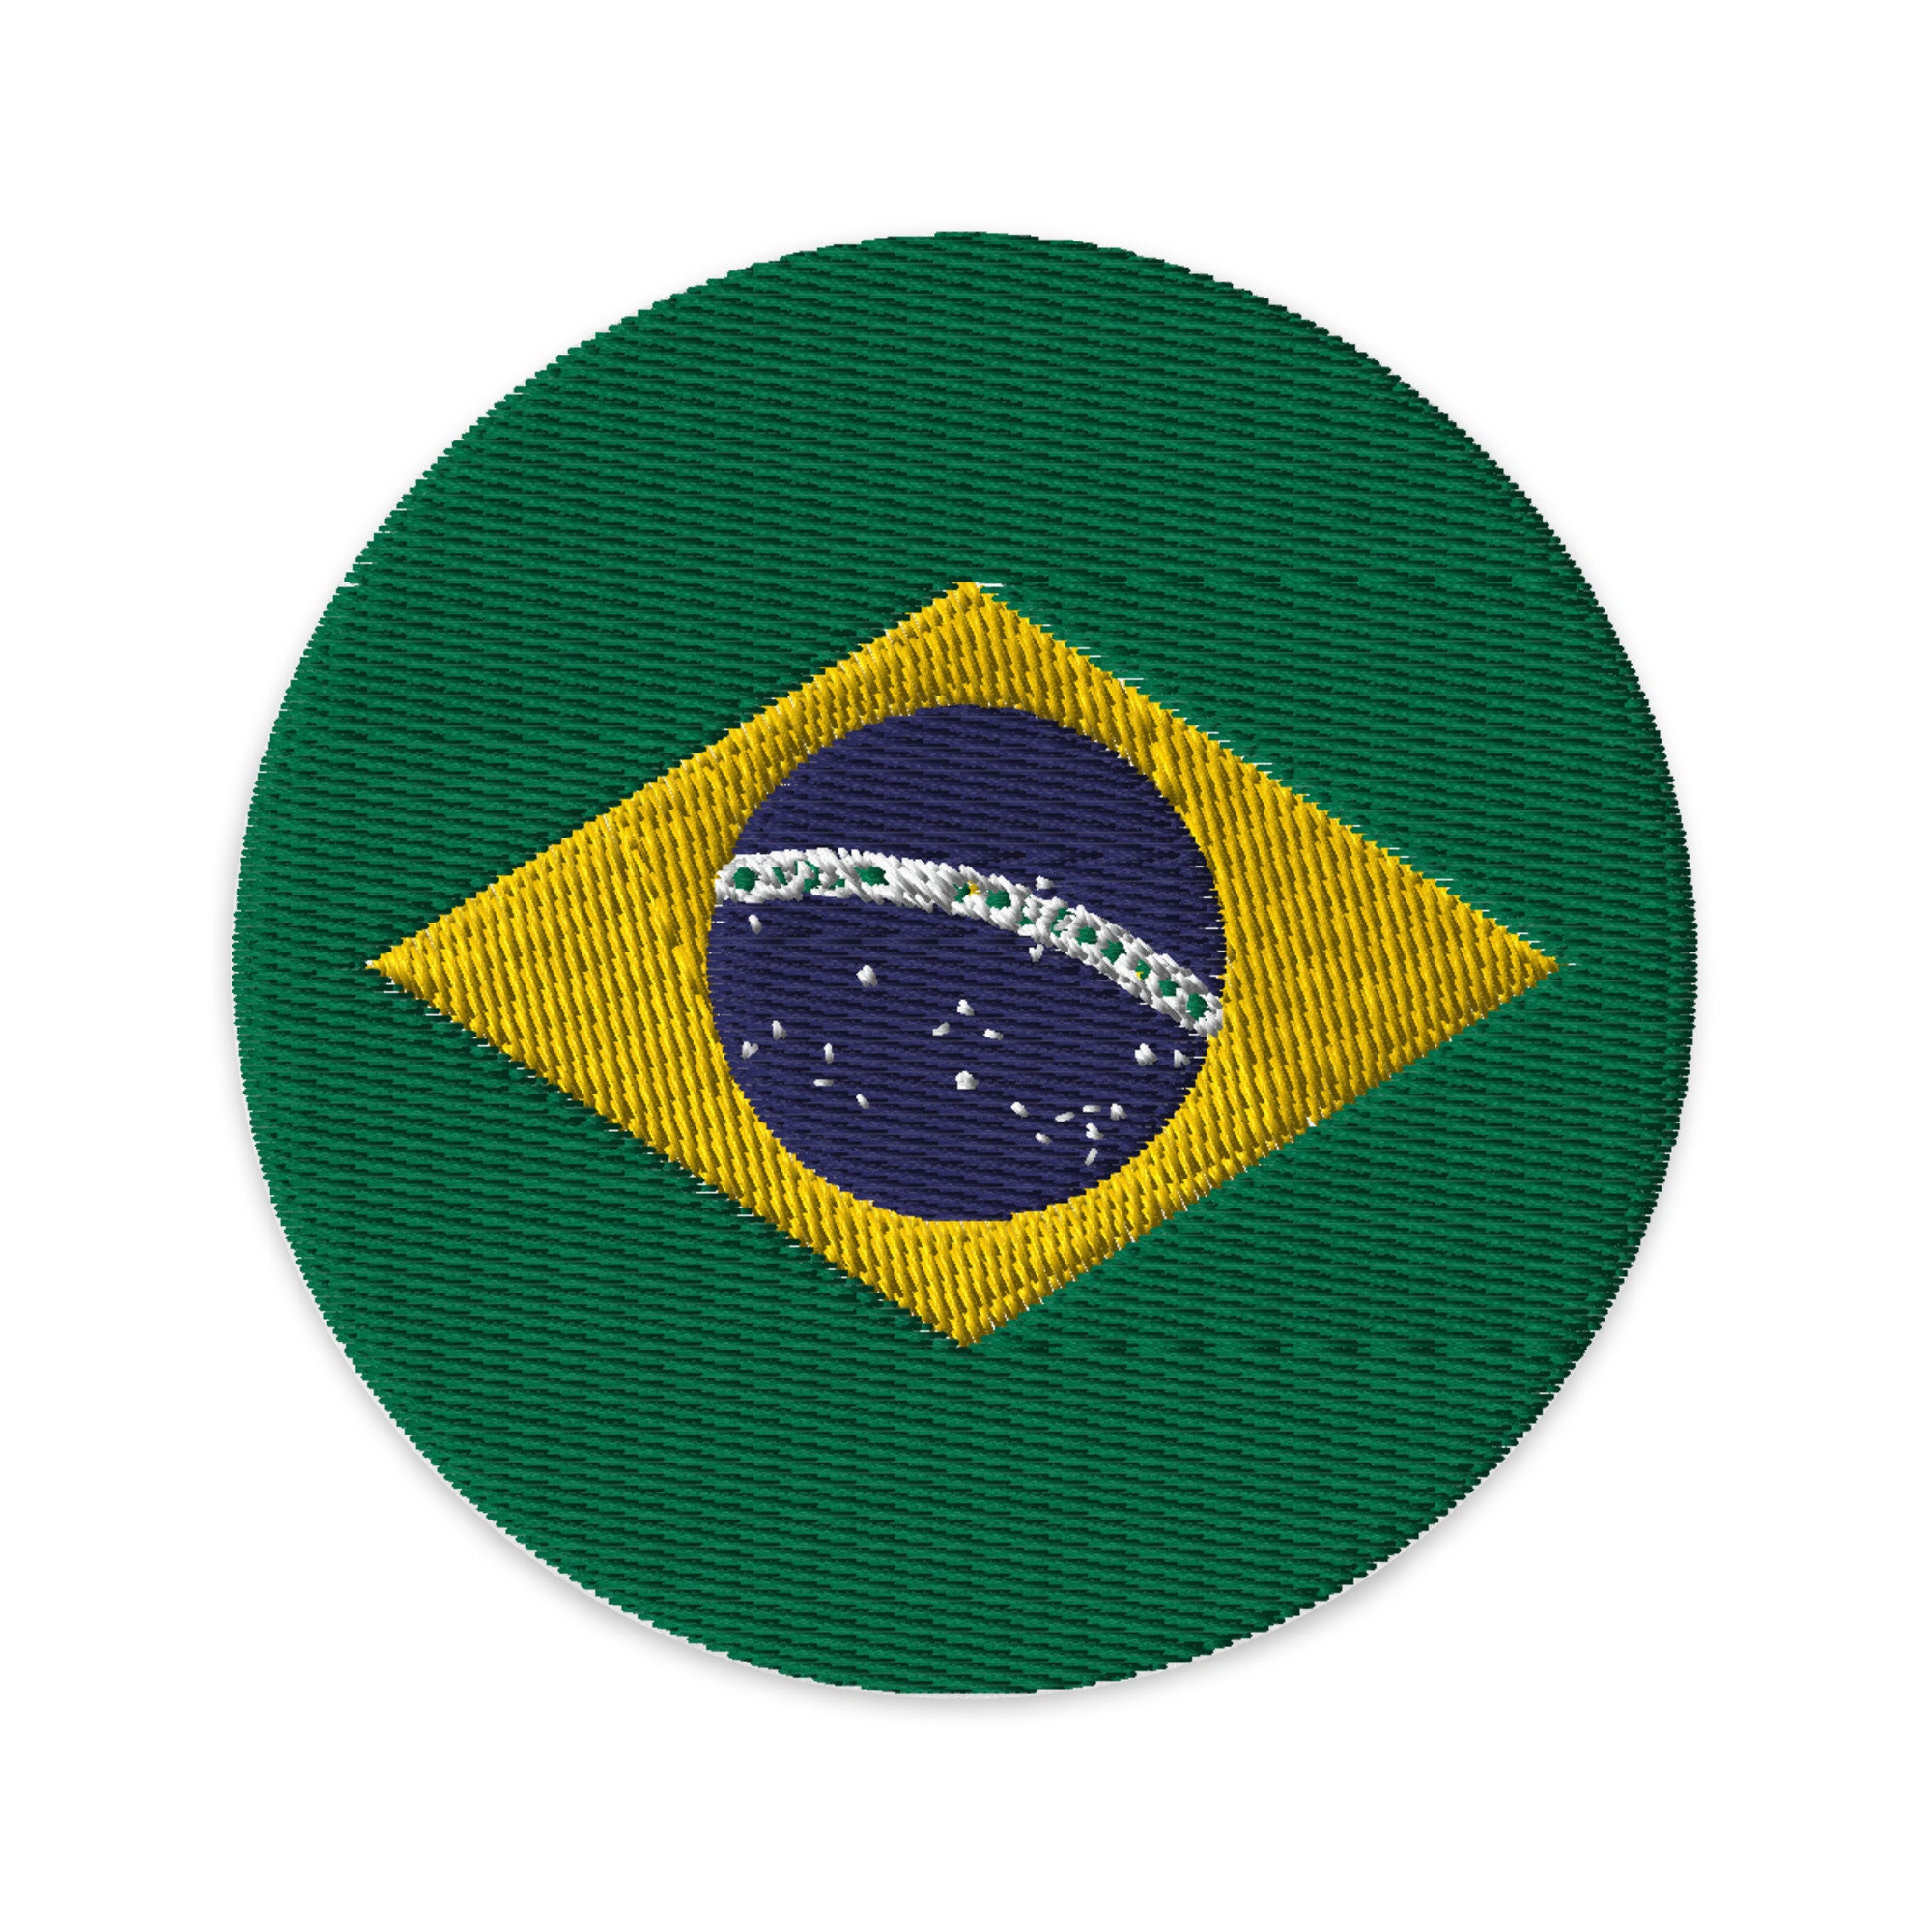 Brazil Flag Patch Embroidered Iron-on or Sew-on DIY Applique for Vest,  Backpack, Clothing Badge, Bikers, Travel Collectors, Souvenir 